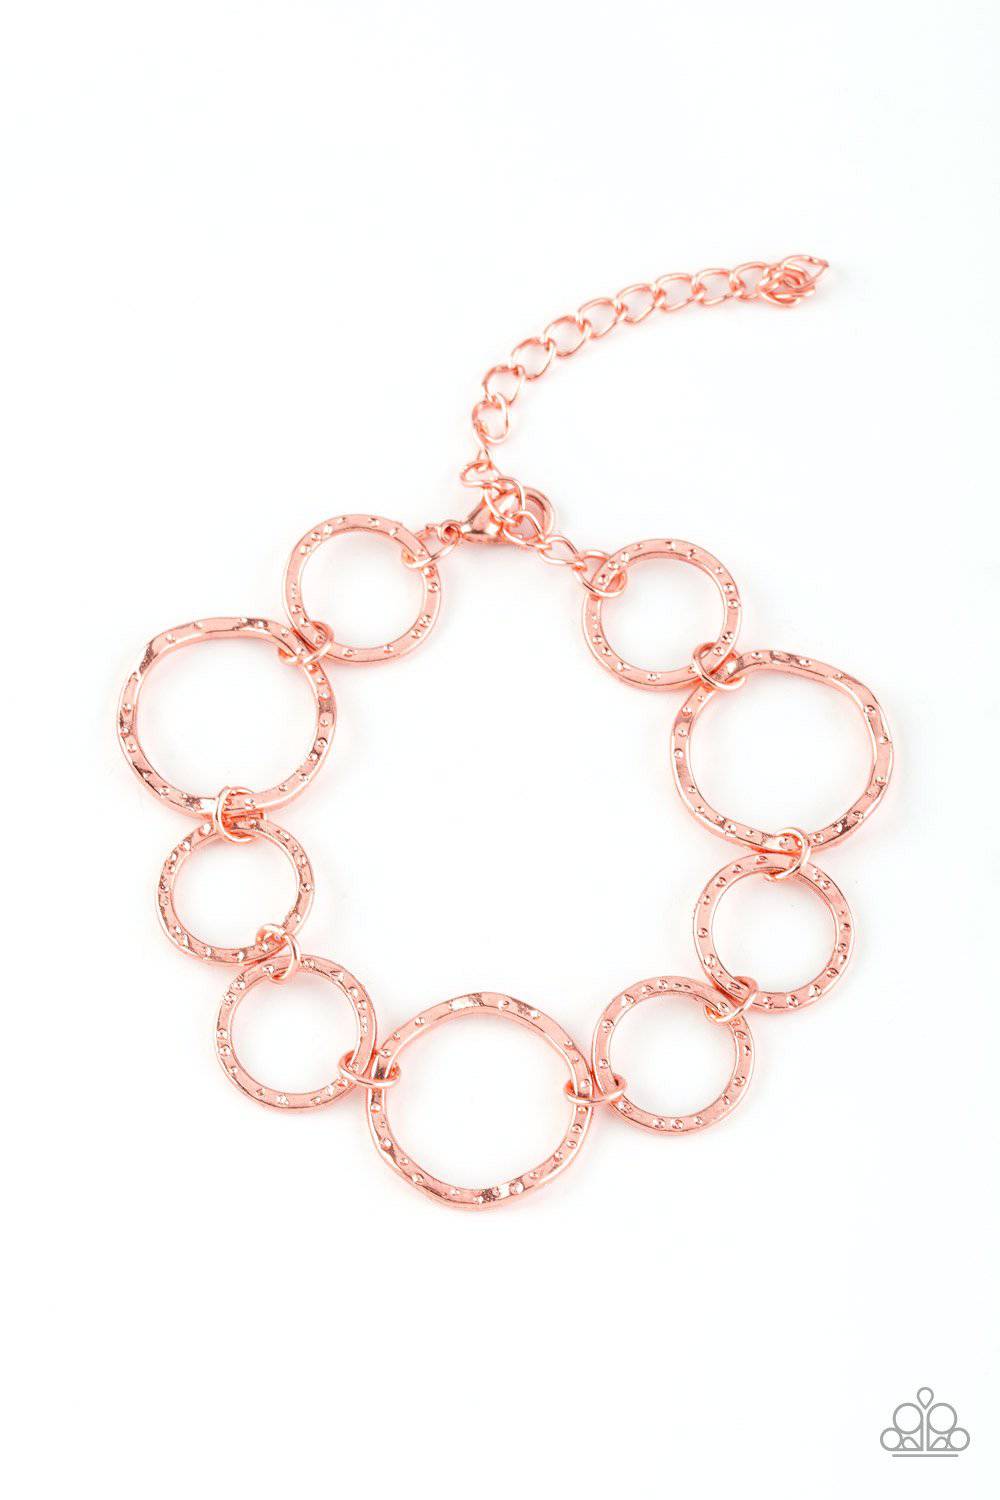 B208 - Ring up the Curtain Copper Bracelet by Paparazzi Accessories on Fancy5Fashion.com